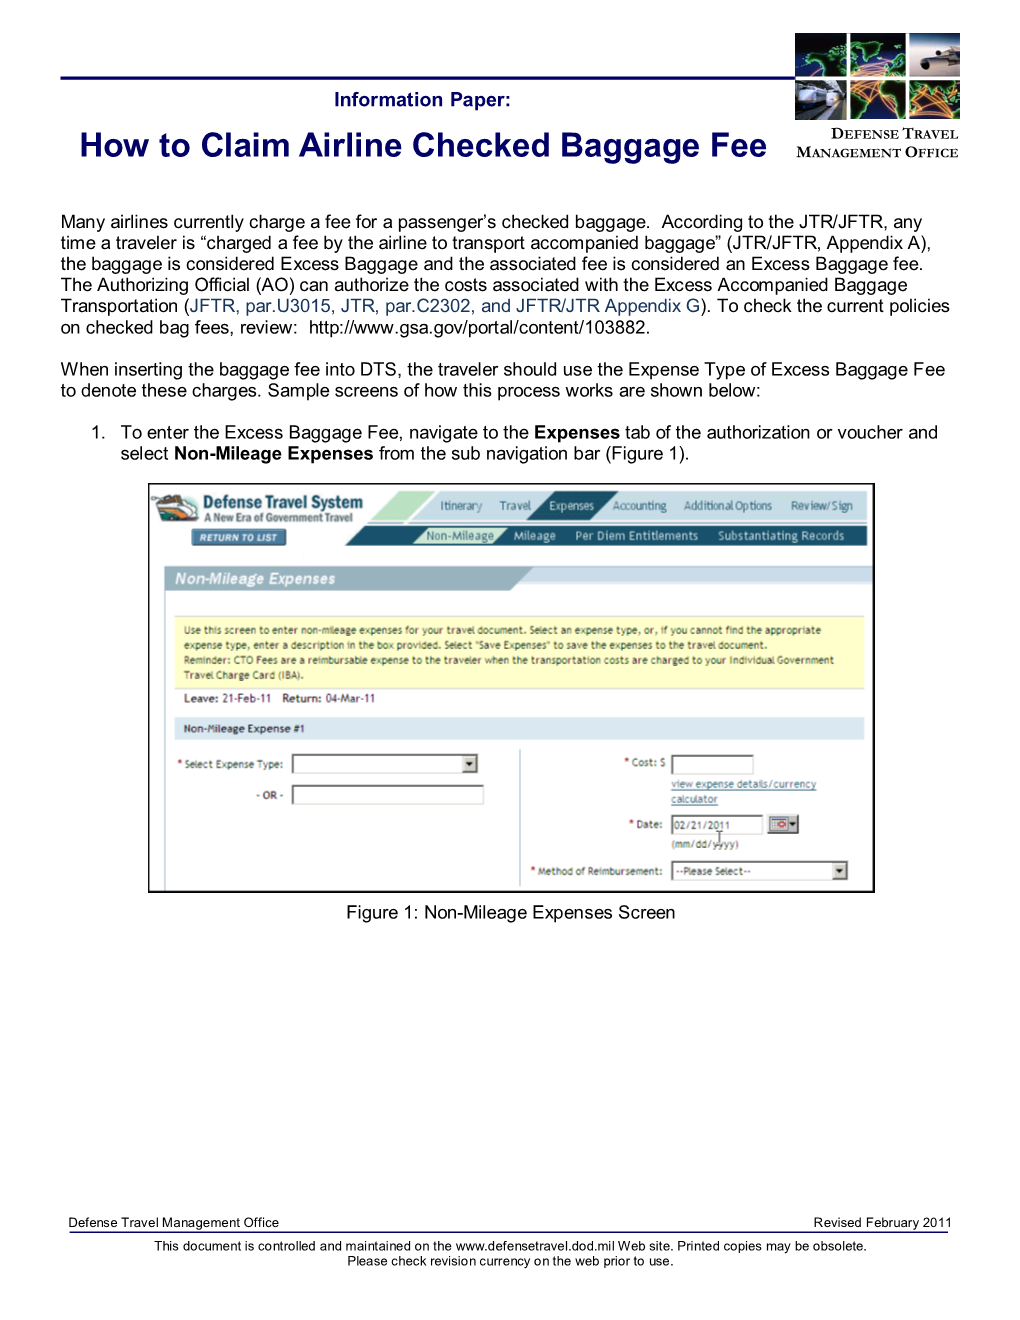 How to Claim Airline Checked Baggage Fee MANAGEMENT OFFICE